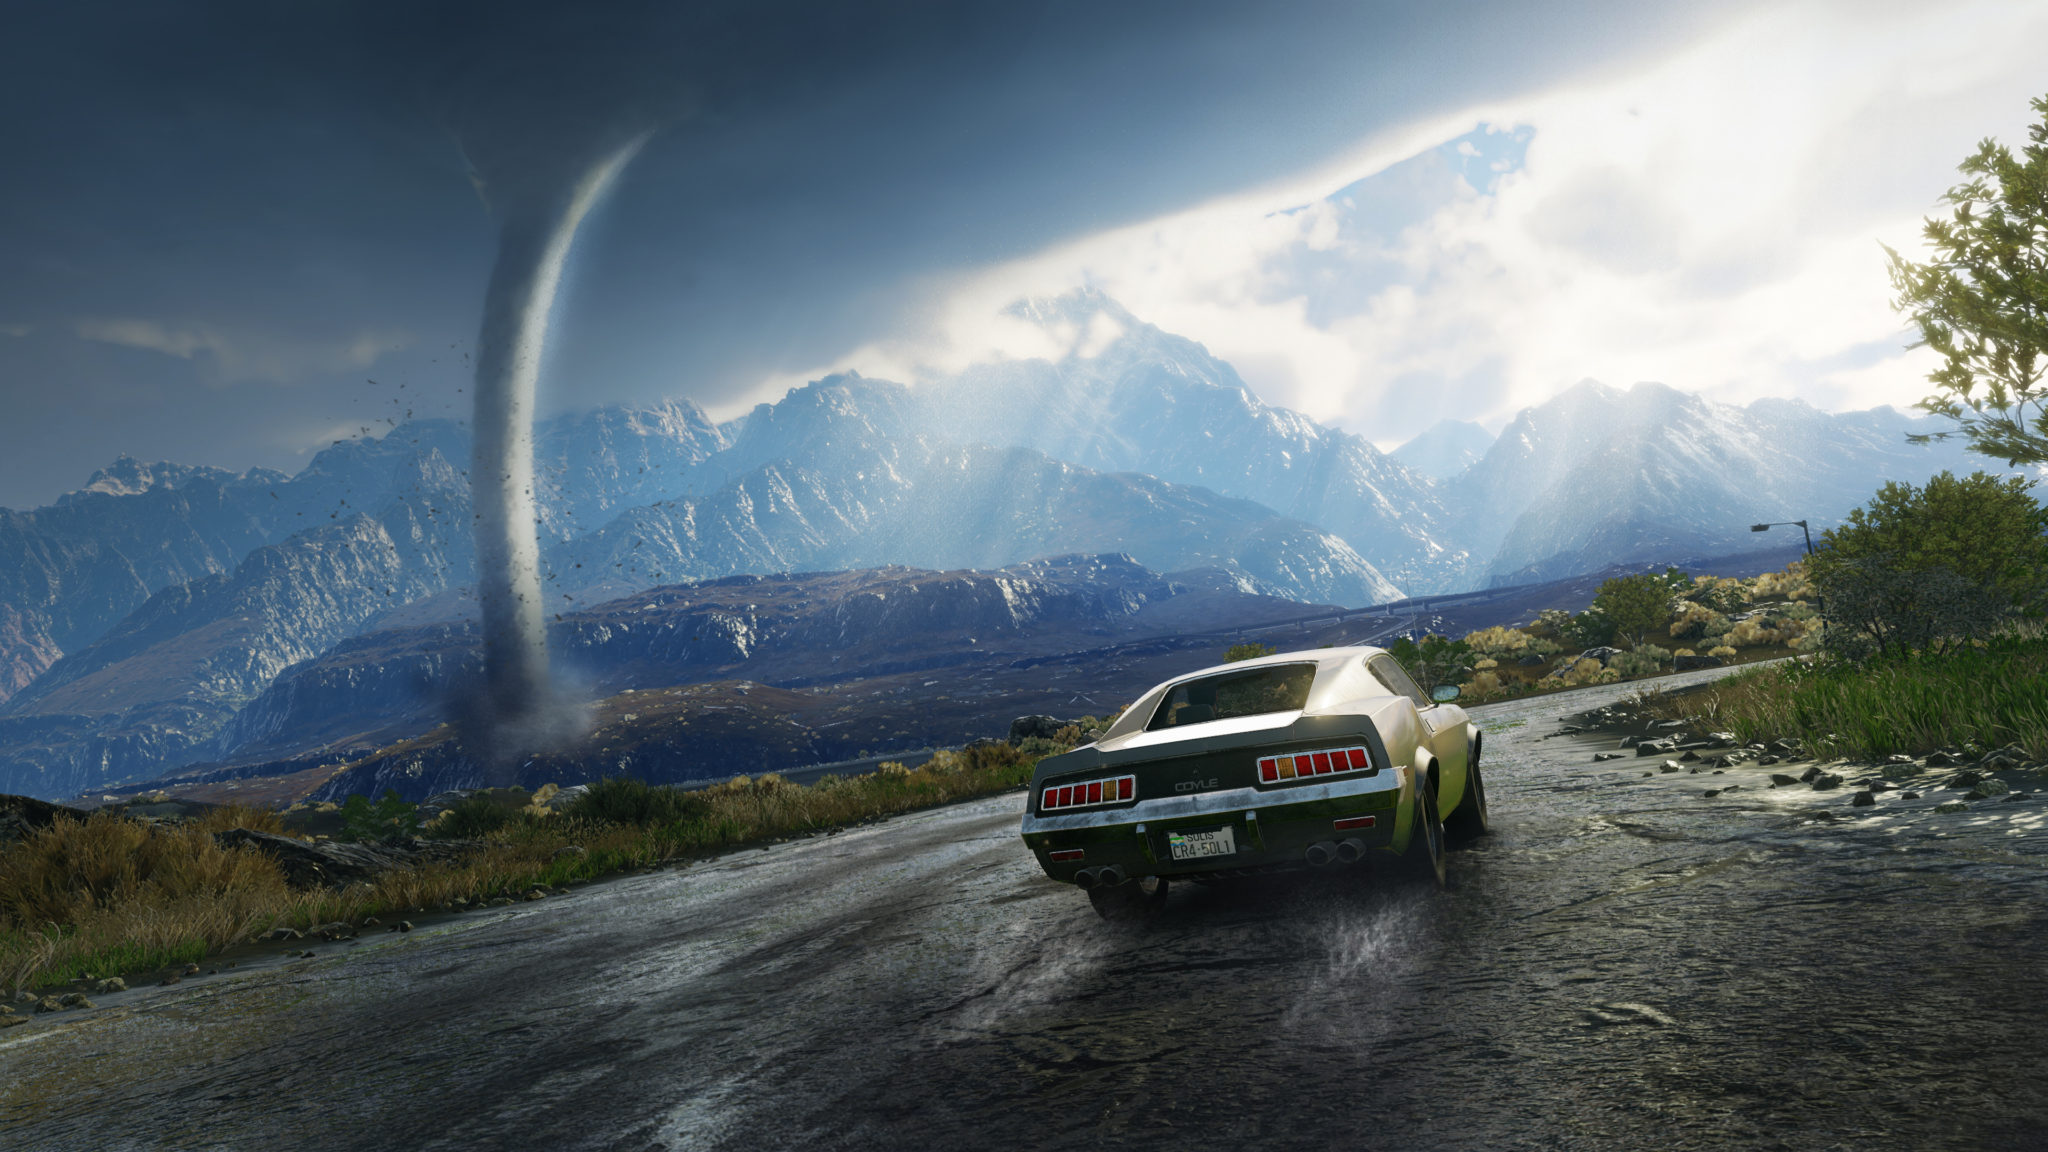 E3 2018: Announcing Just Cause 4 for Xbox One